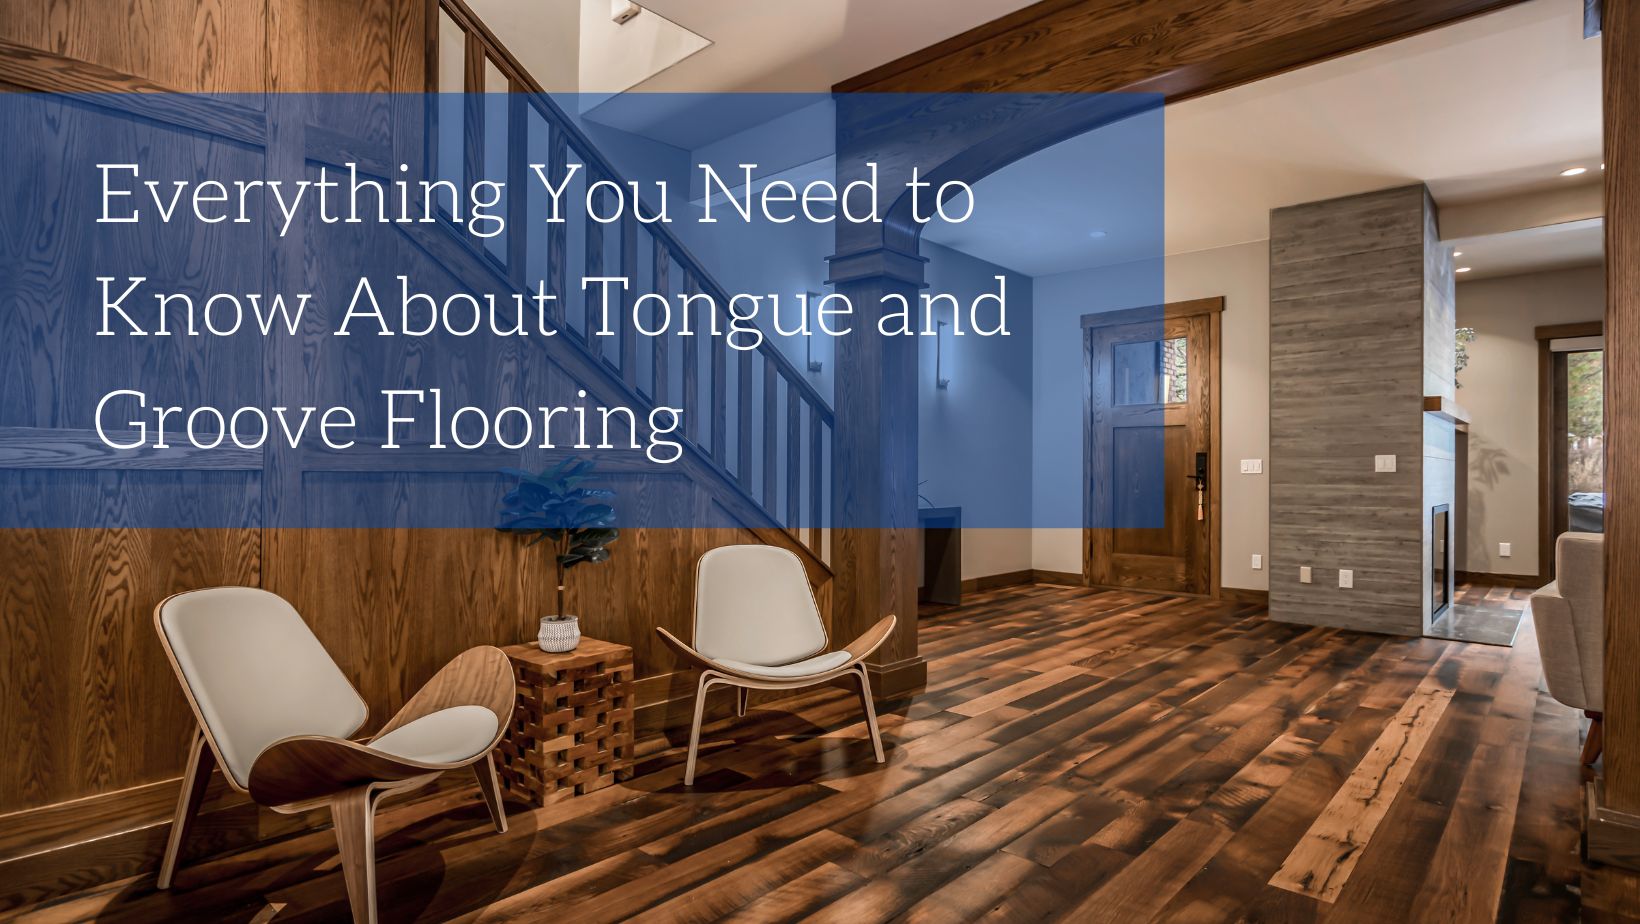 Everything You Need to Know About Tongue and Groove Flooring